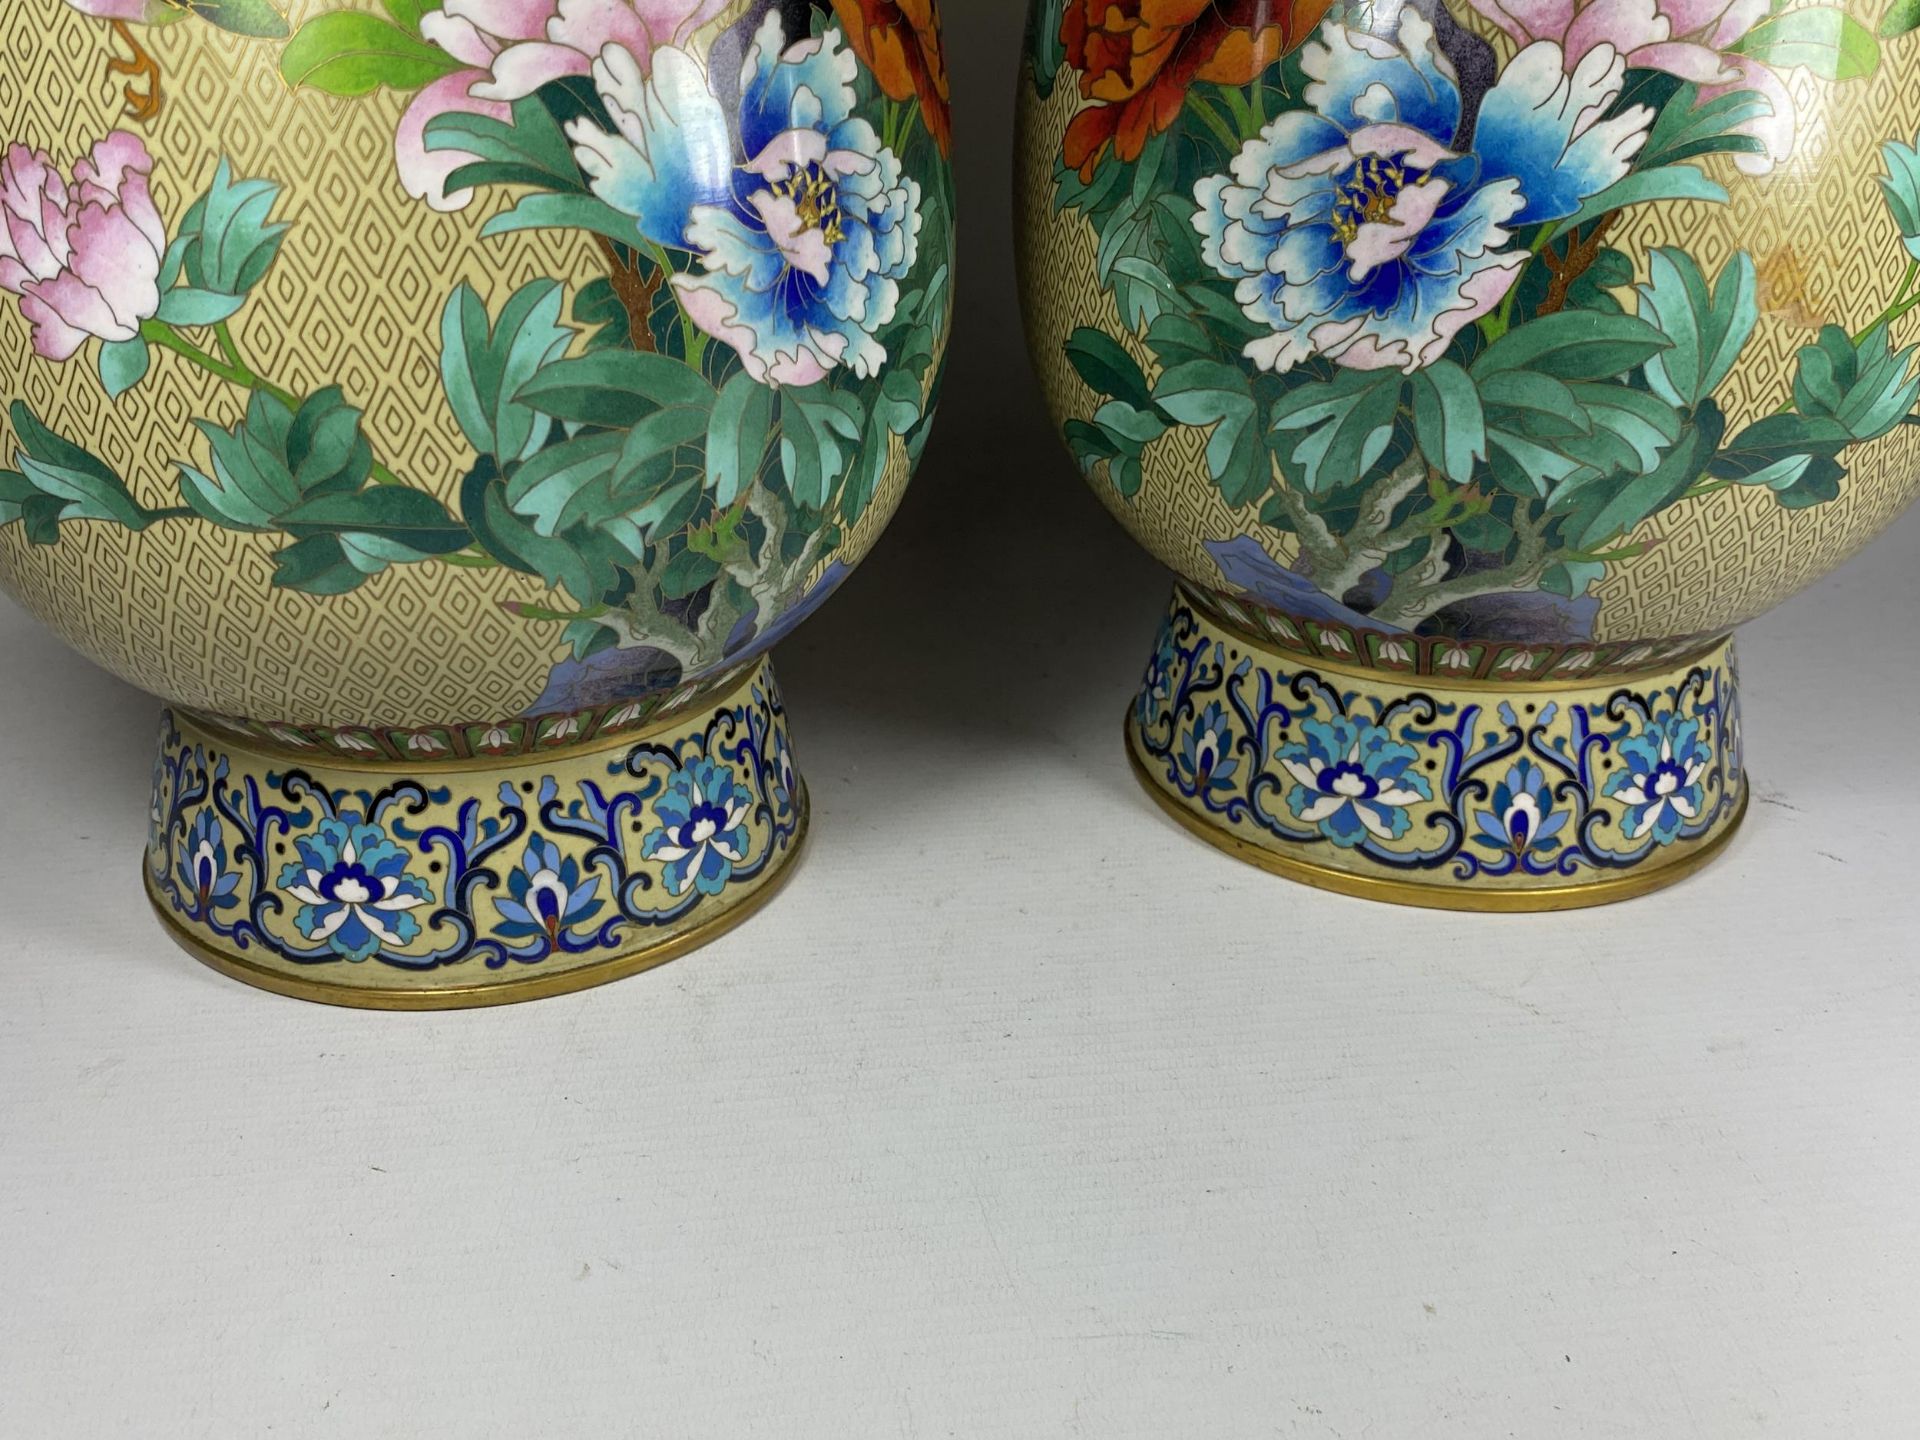 A LARGE PAIR OF CHINESE CLOISONNE BALUSTER FORM VASES WITH BIRD AND FLORAL DECORATION, HEIGHT 39CM - Image 5 of 9